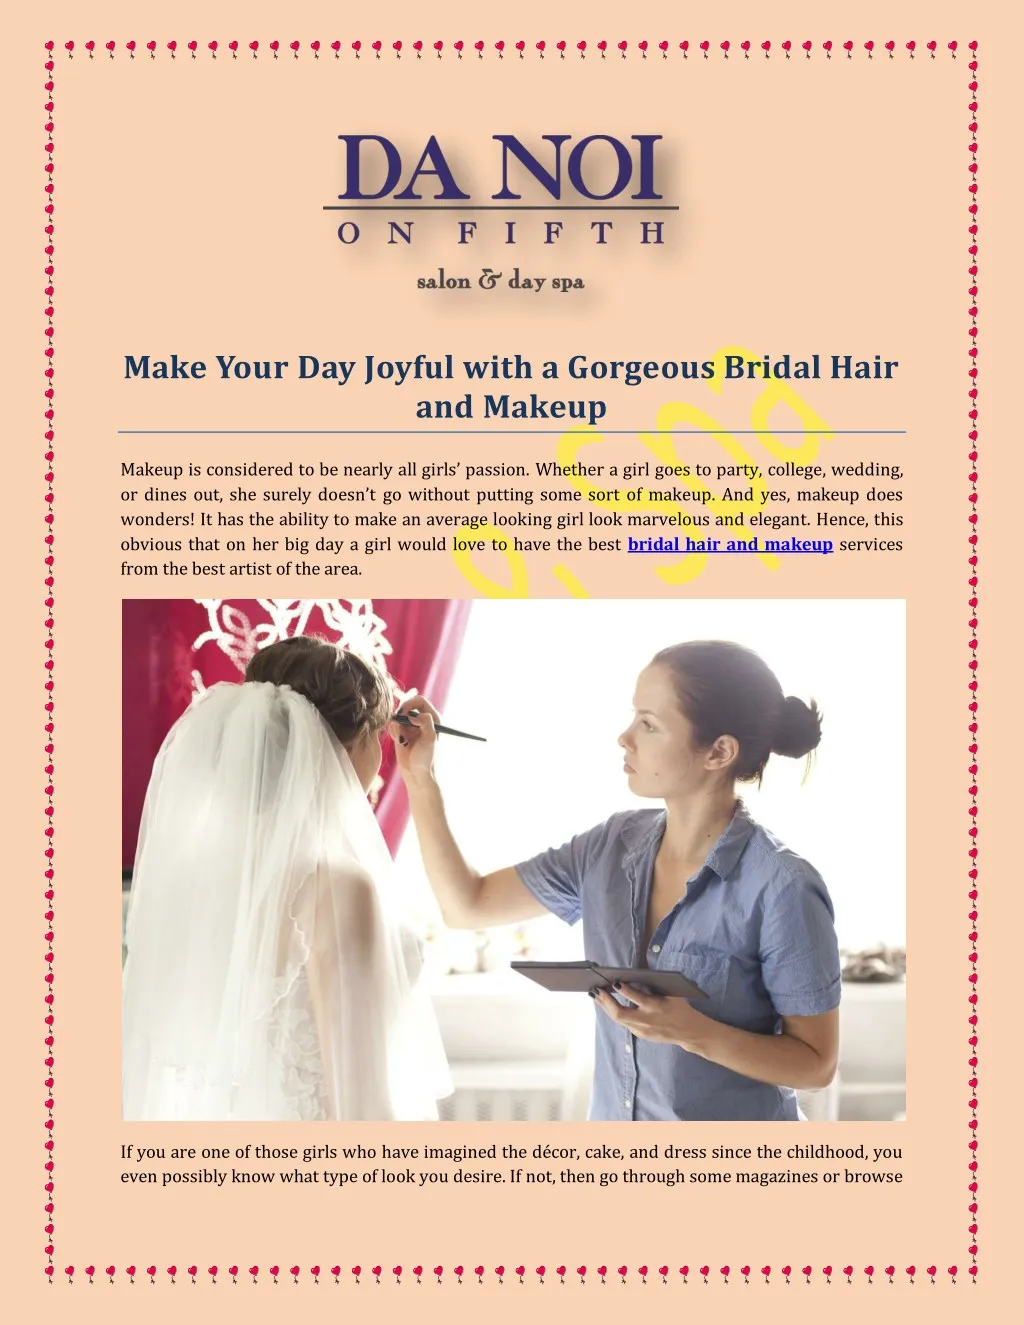 make your day joyful with a gorgeous bridal hair